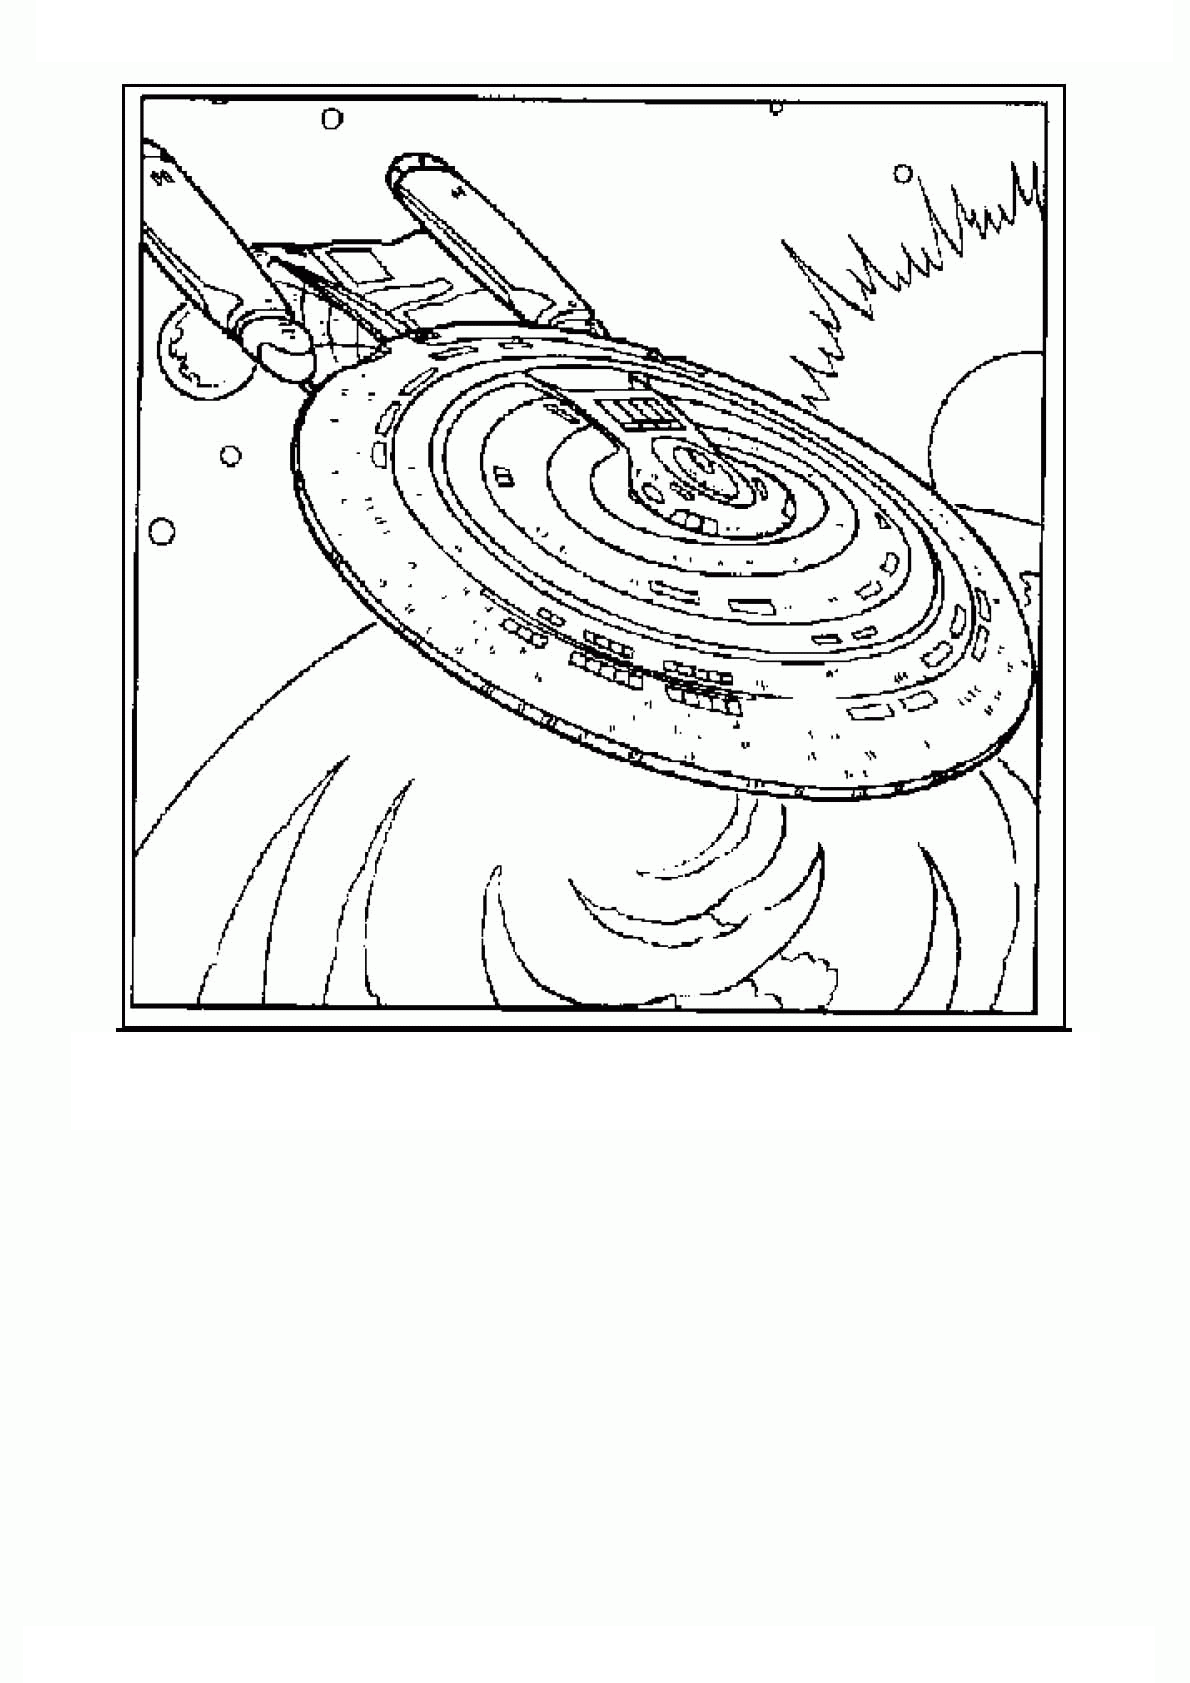 Star trek coloring pages to download and print for free